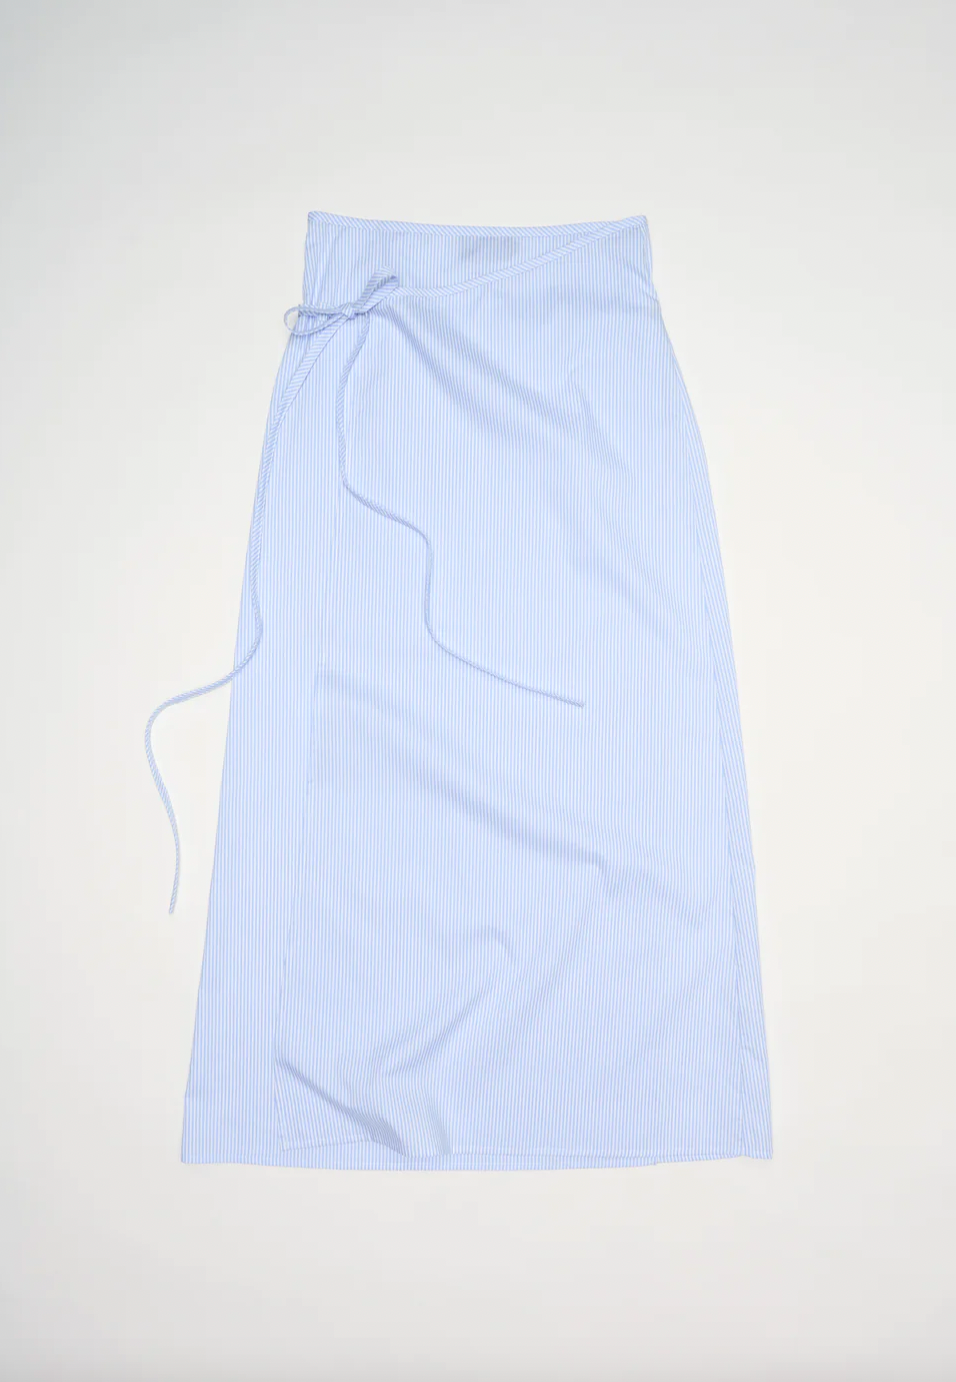 Product Image for Technique Wrap Skirt, Clear Blue Stripe